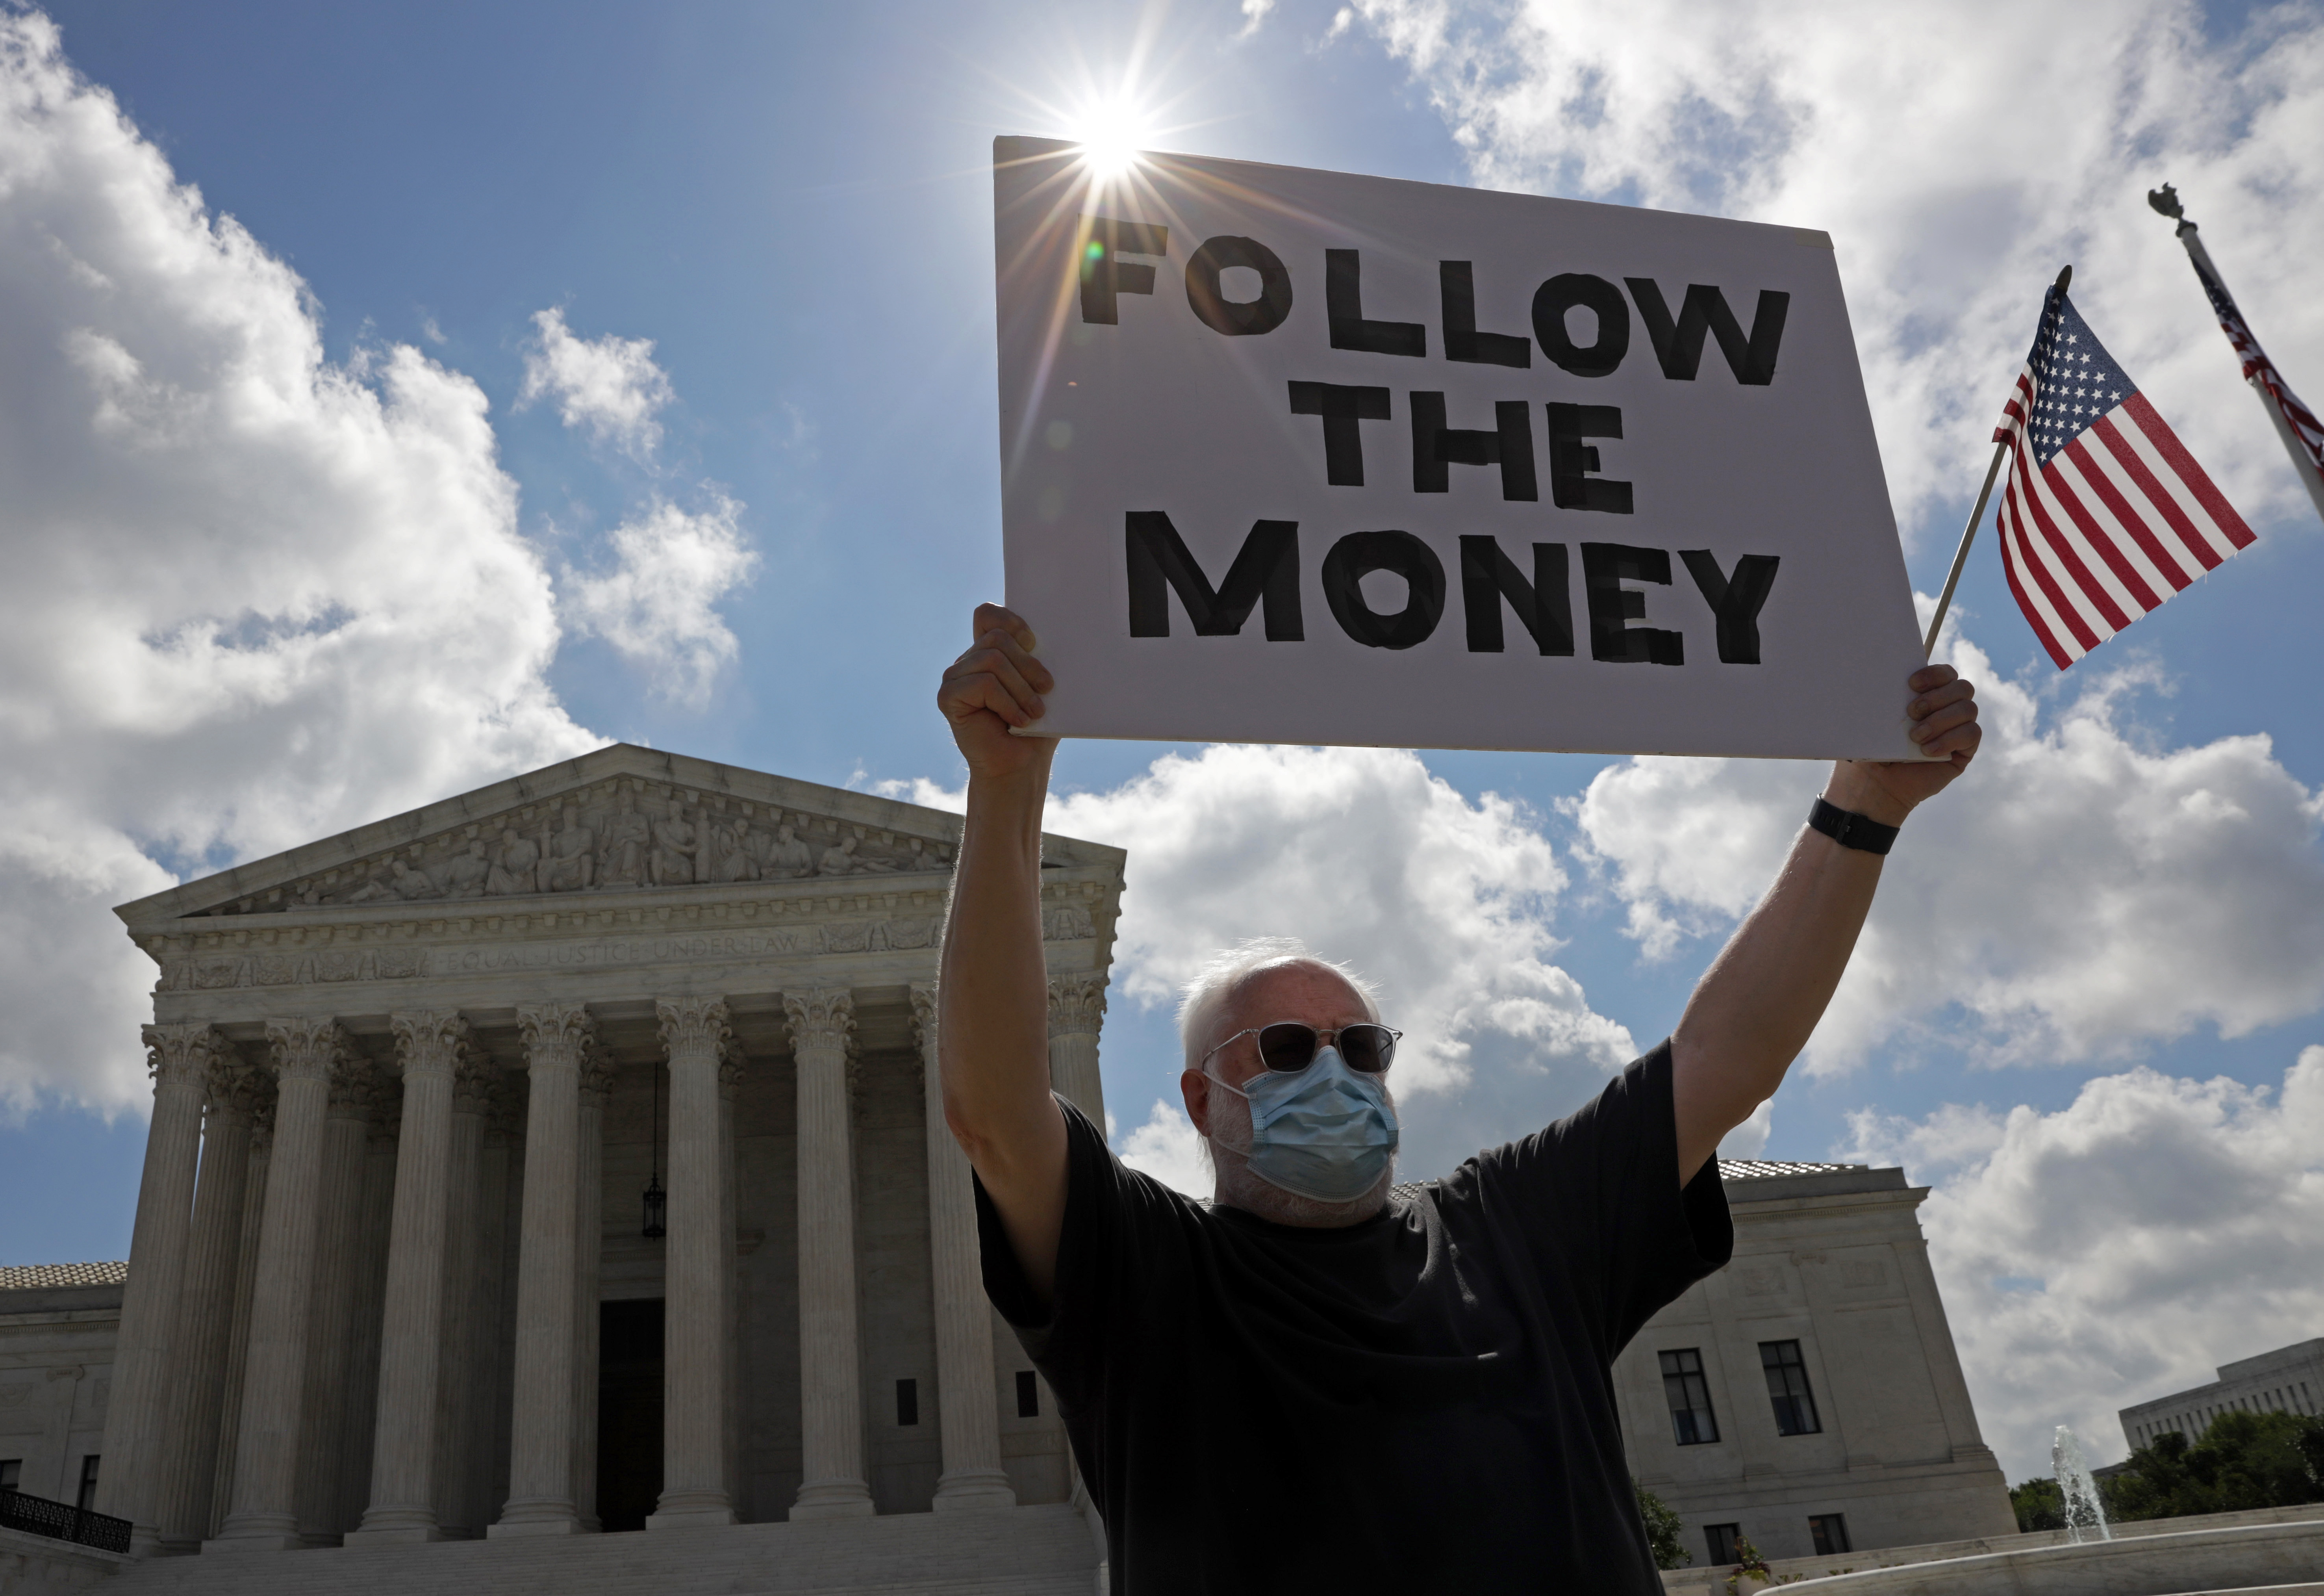 WASHINGTON, DC - JULY 09: A man holds up a “Follow the Money” sign in front of the U.S. Supreme Court July 9, 2020 in Washington, DC. The Supreme Court has issued a 7-2 ruling that New York prosecutor can obtain President Donald Trump’s financial records, including tax returns. (Photo by Alex Wong/Getty Images)